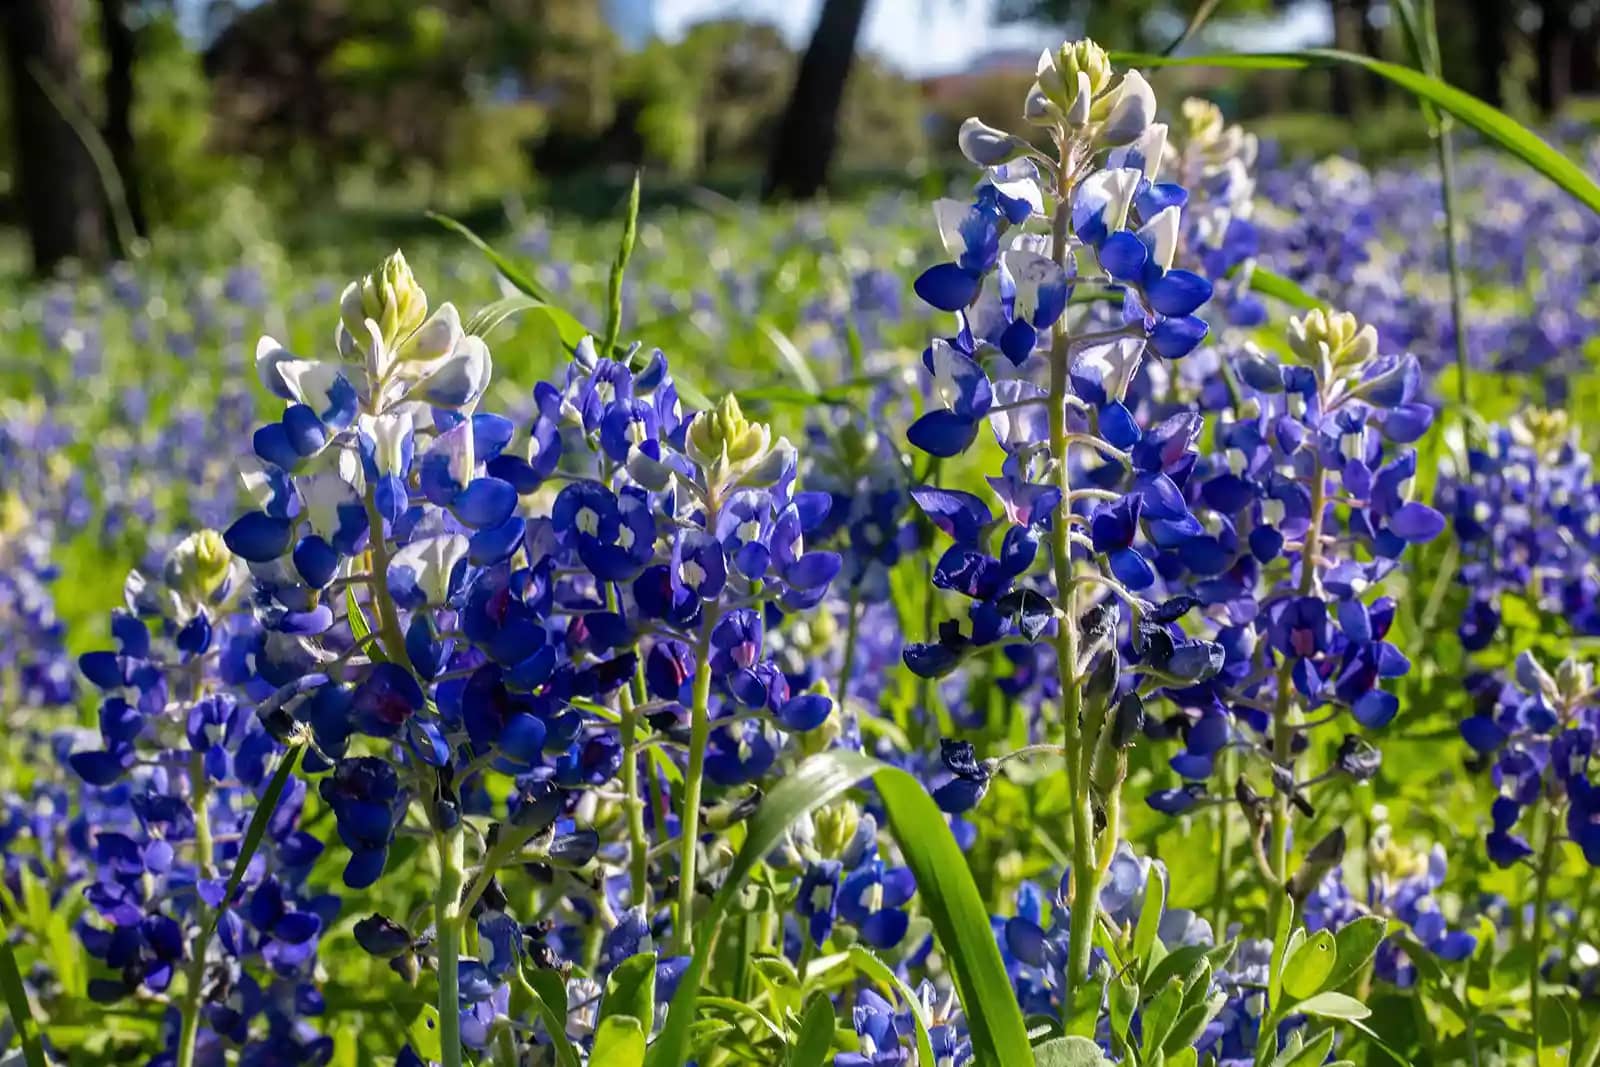 A stand of blooming Texas bluebonnet flowers at their peak in spring, on a sunny day, a must-see stop on any Texas road trip